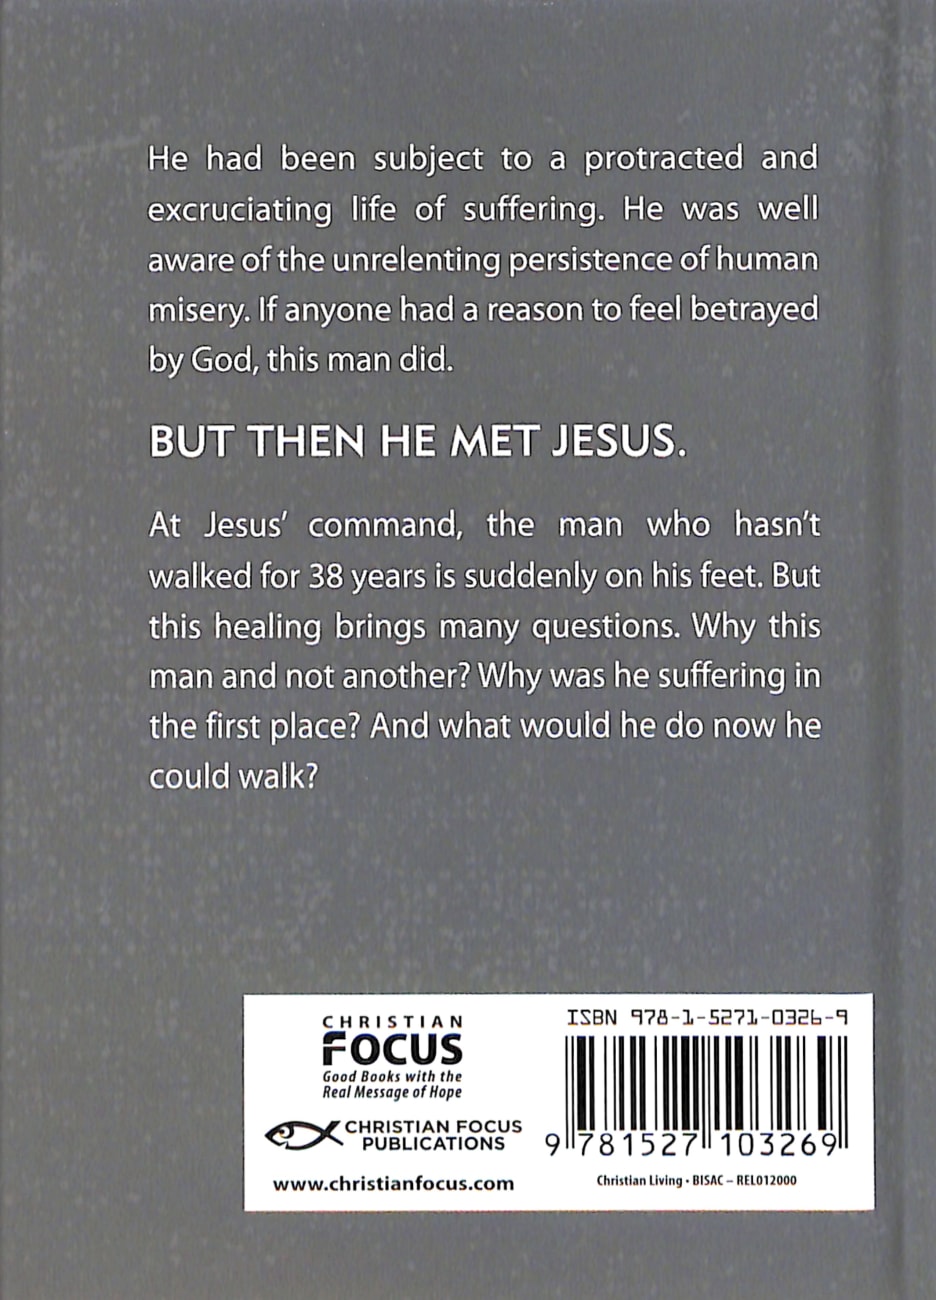 A Conversation With Jesus... on Suffering (A Conversation With Jesus Series) Hardback